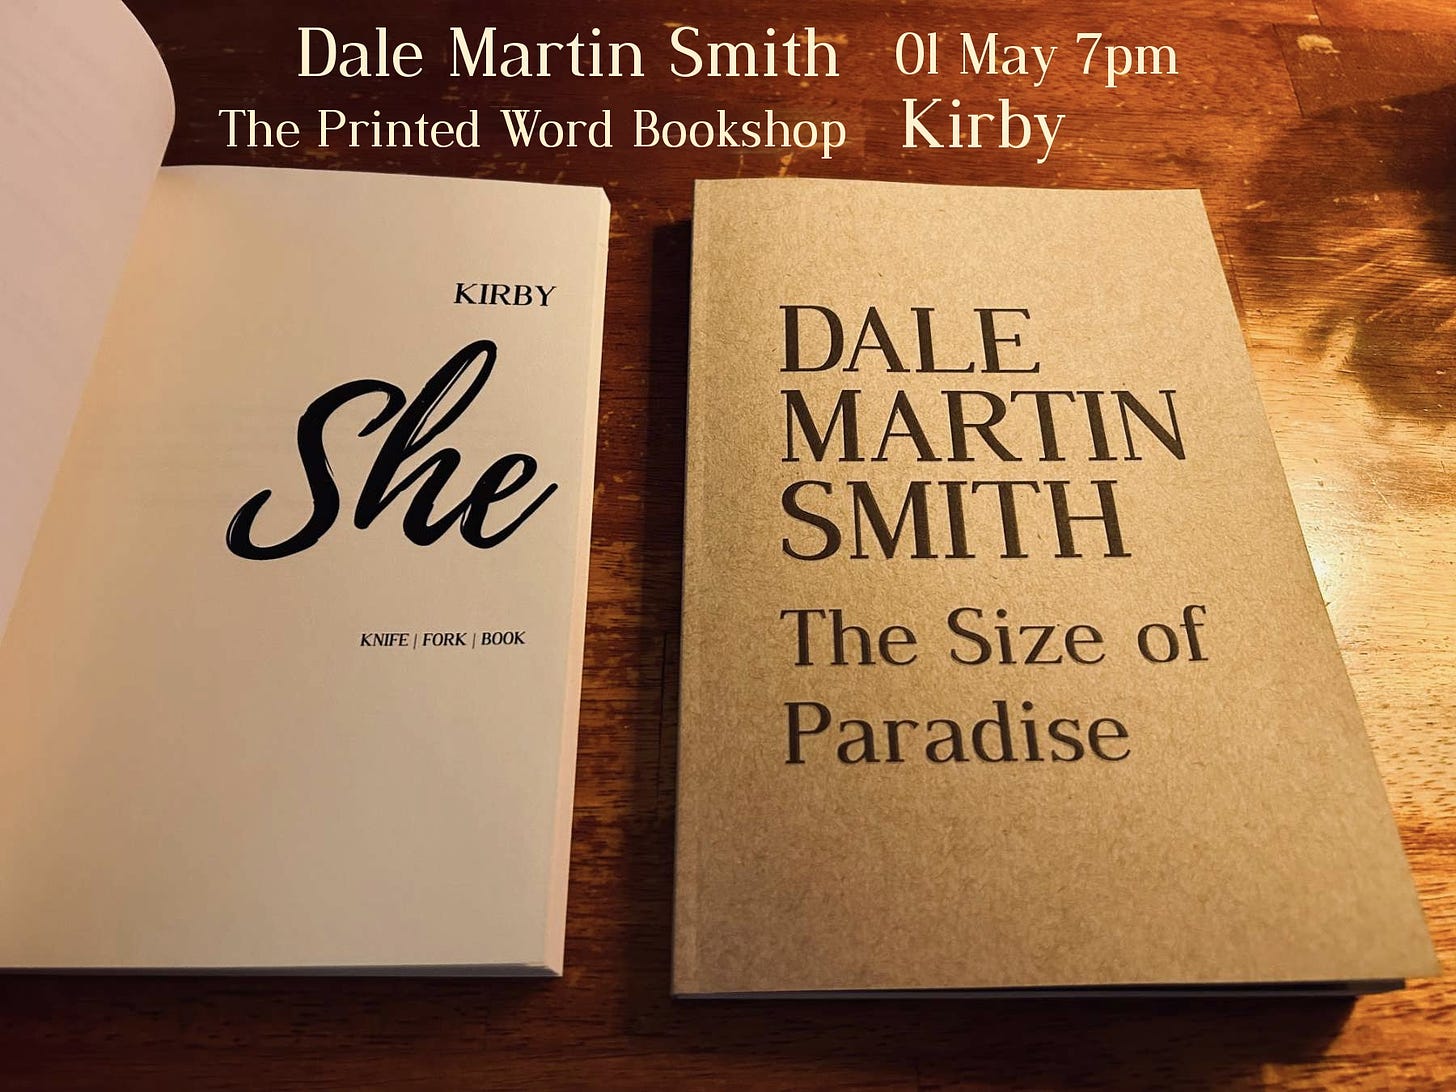  DALE MARTIN SMITH & KIRBY read May 1st 7pm at The Printed Word Bookshop 16 McMurray St. Dundas, ON 